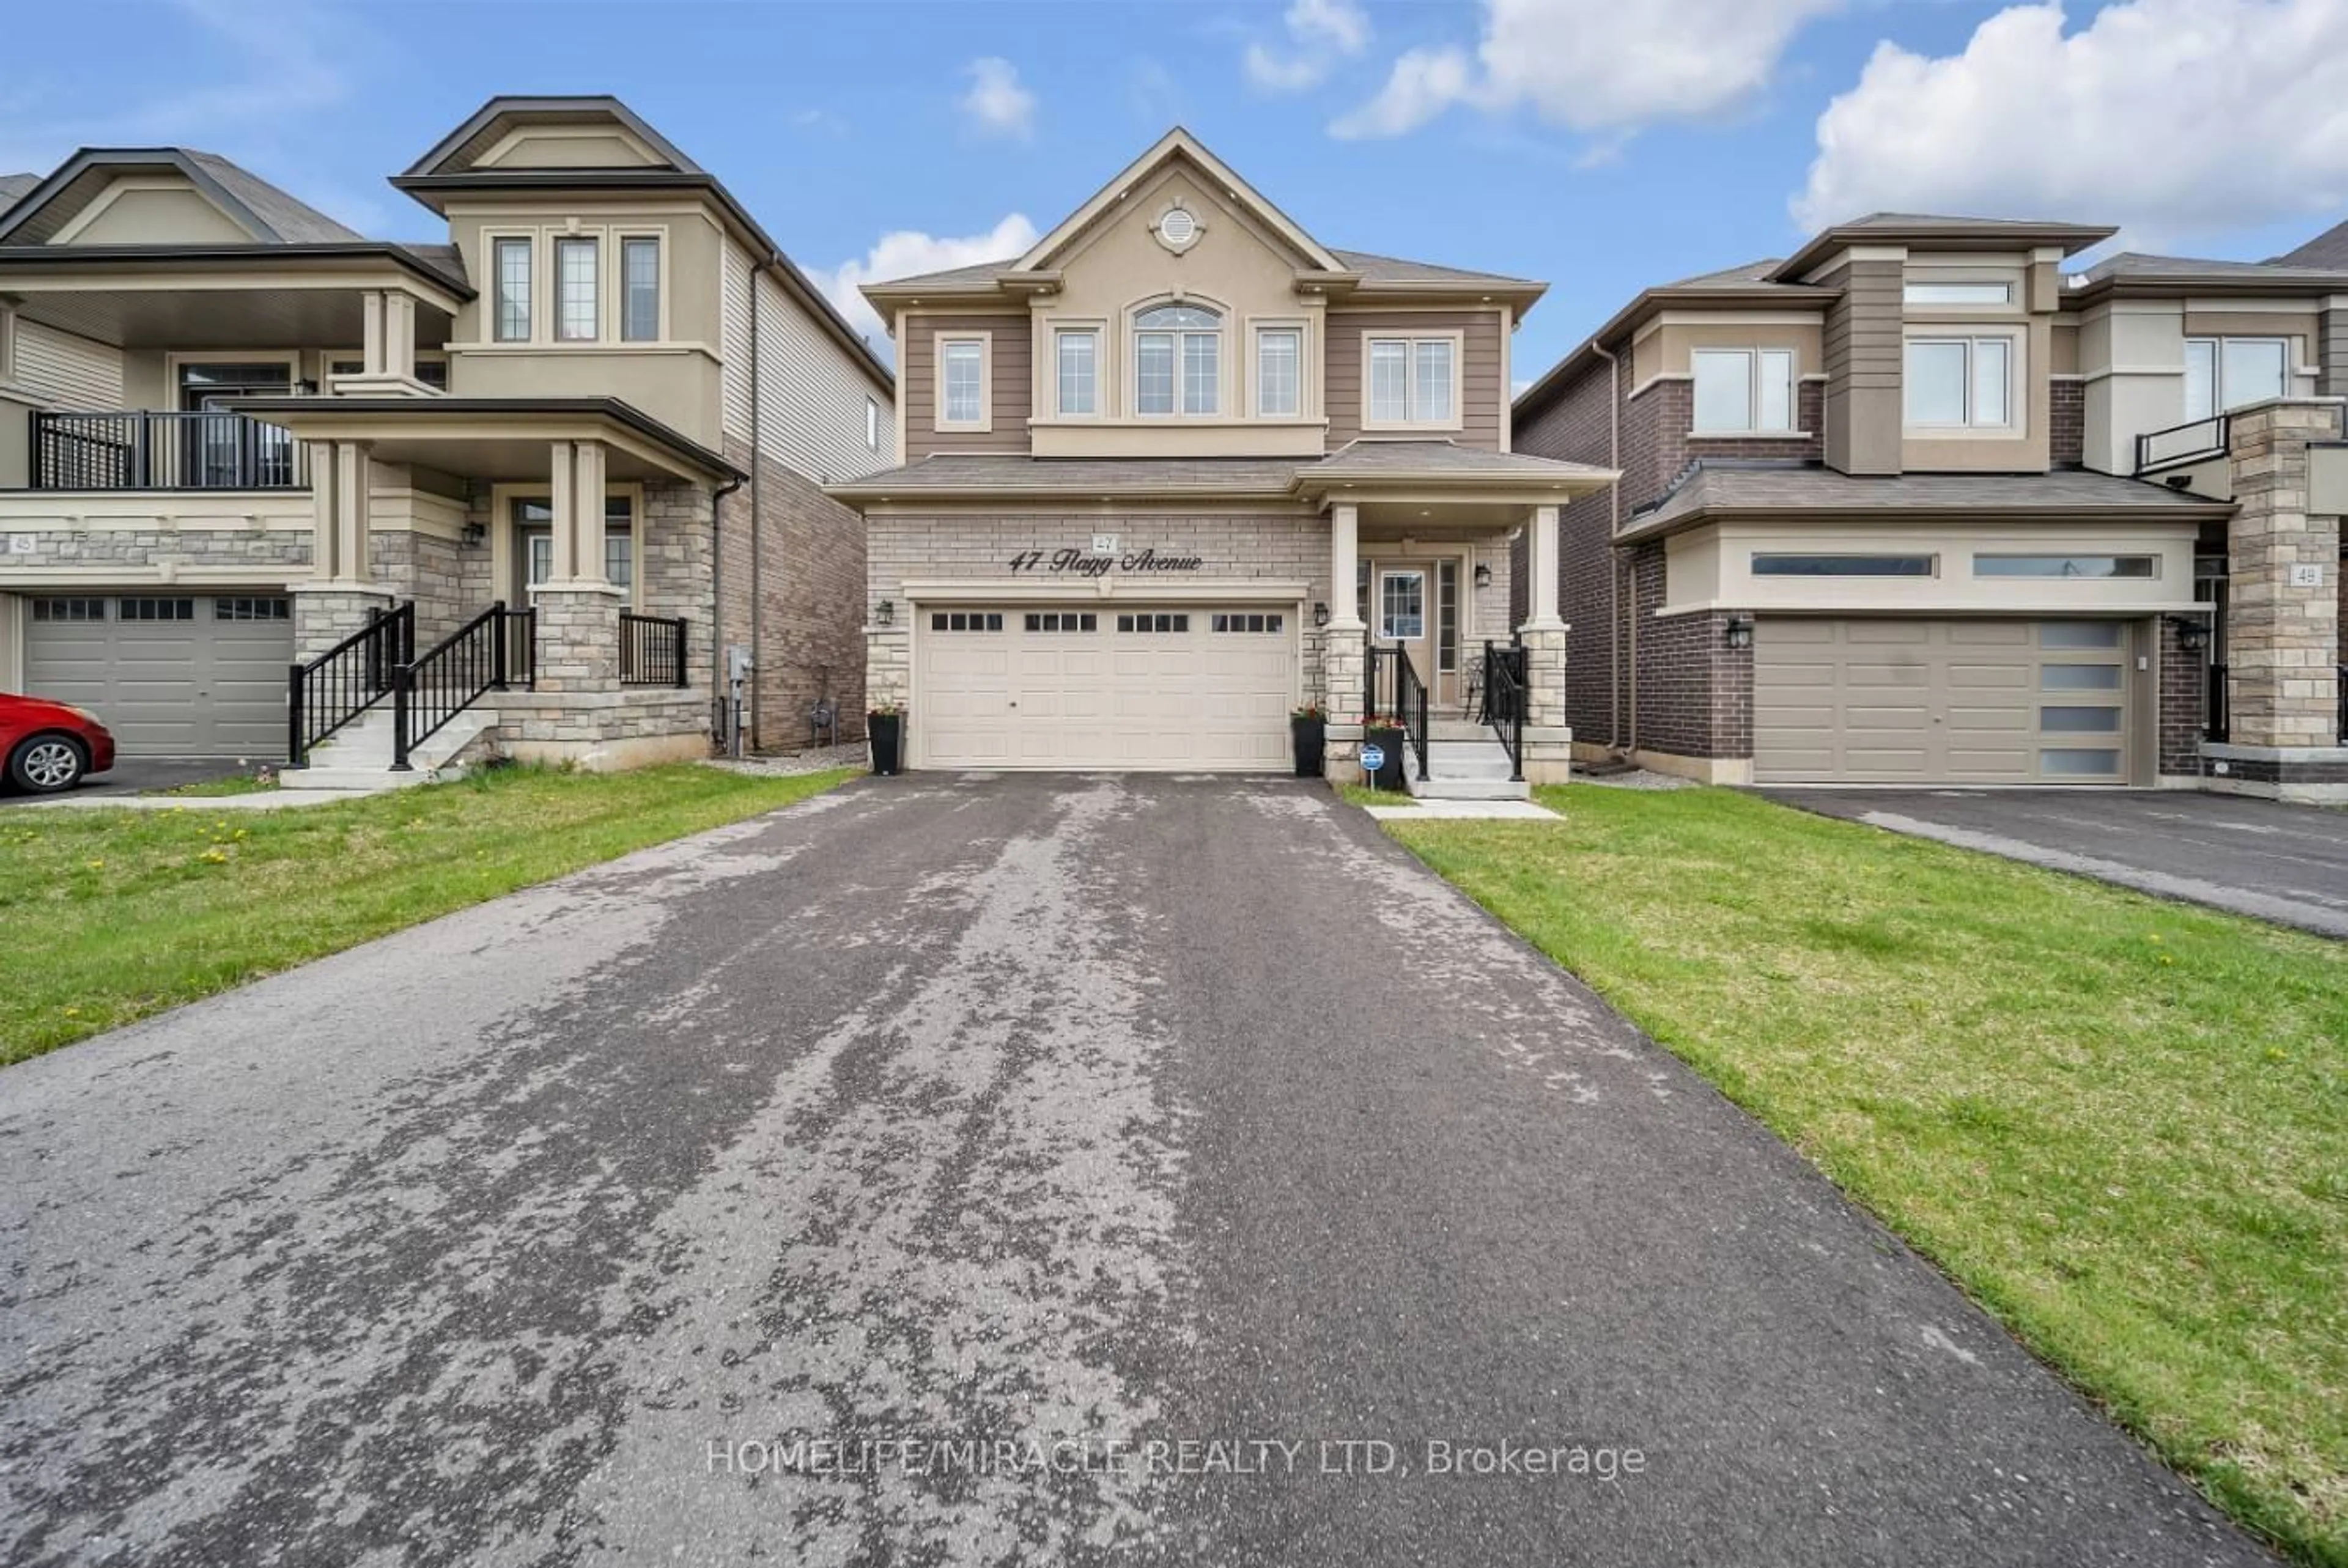 Frontside or backside of a home for 47 Flagg Ave, Brant Ontario N3L 0K1